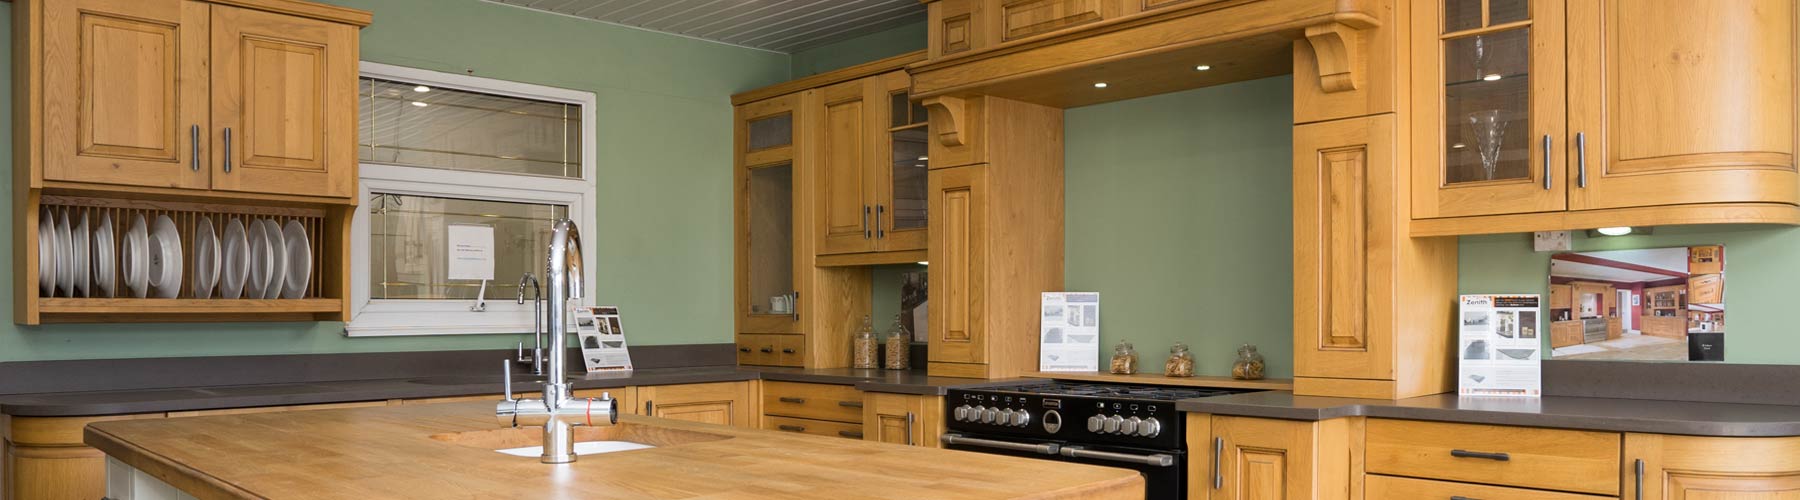 Timber kitchen on display in our showroom on the Kirkby industrial estate.e